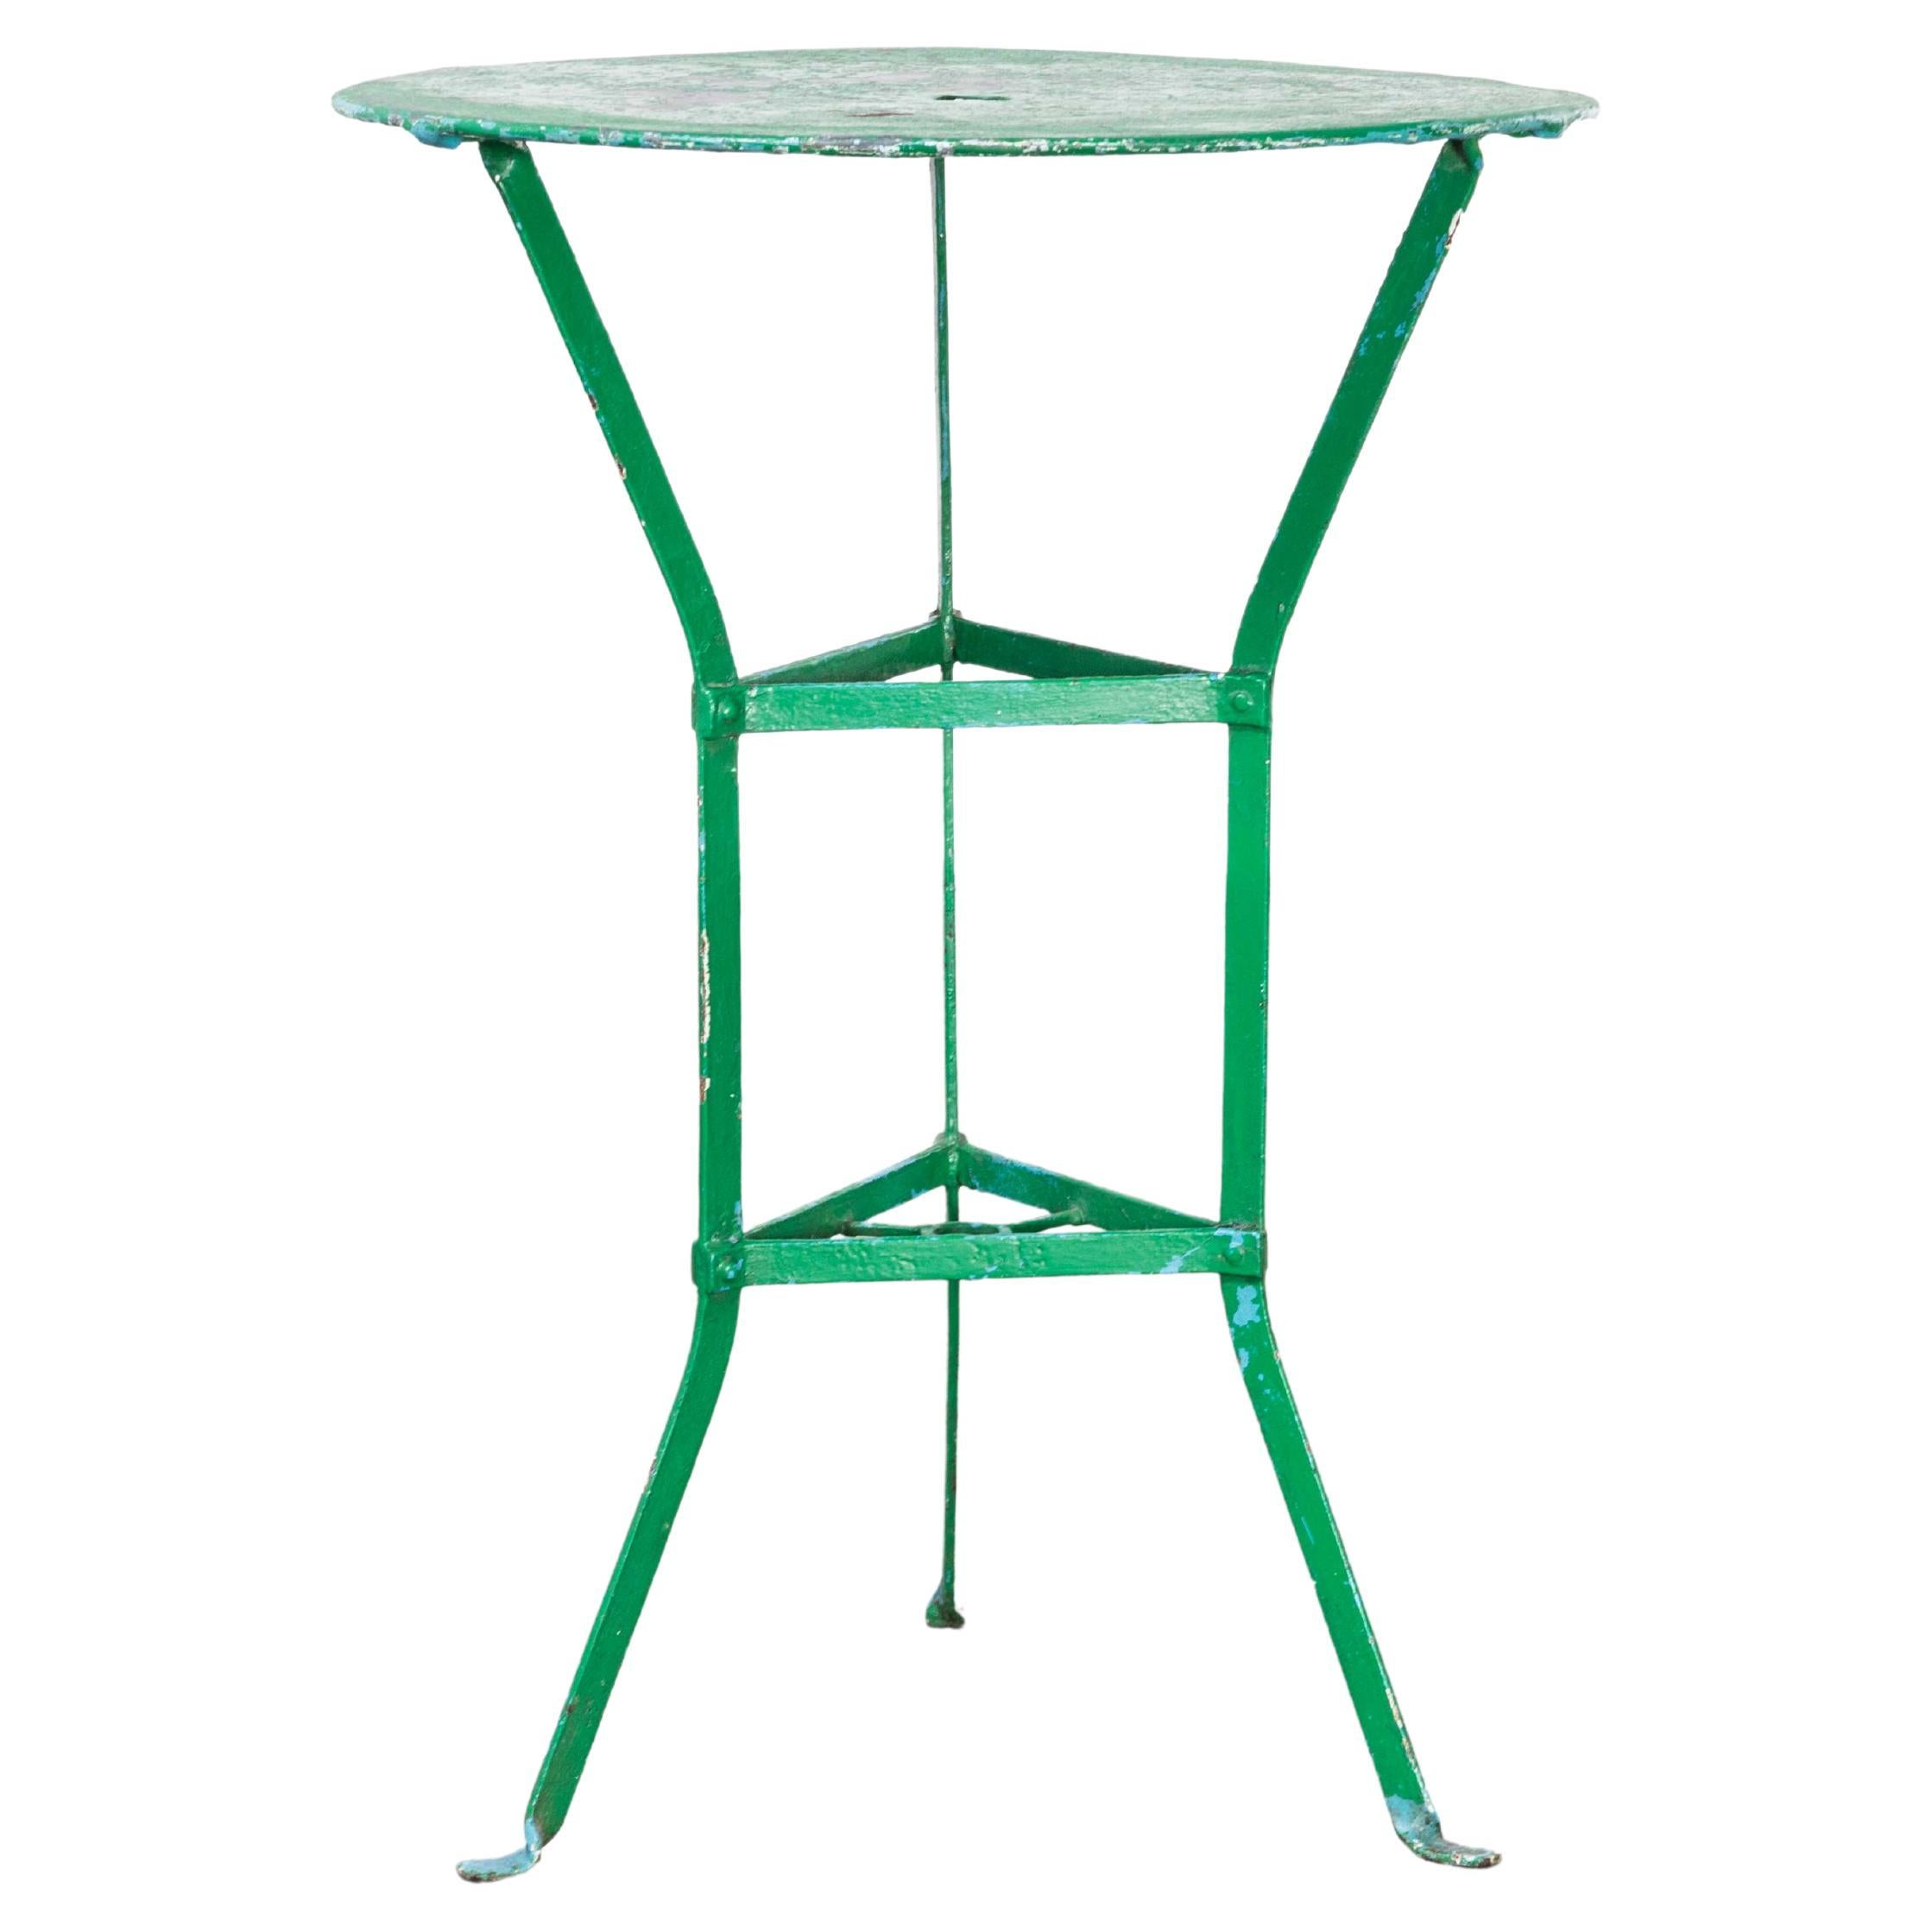 1950's French Small Round Metal Green Gueridon Table